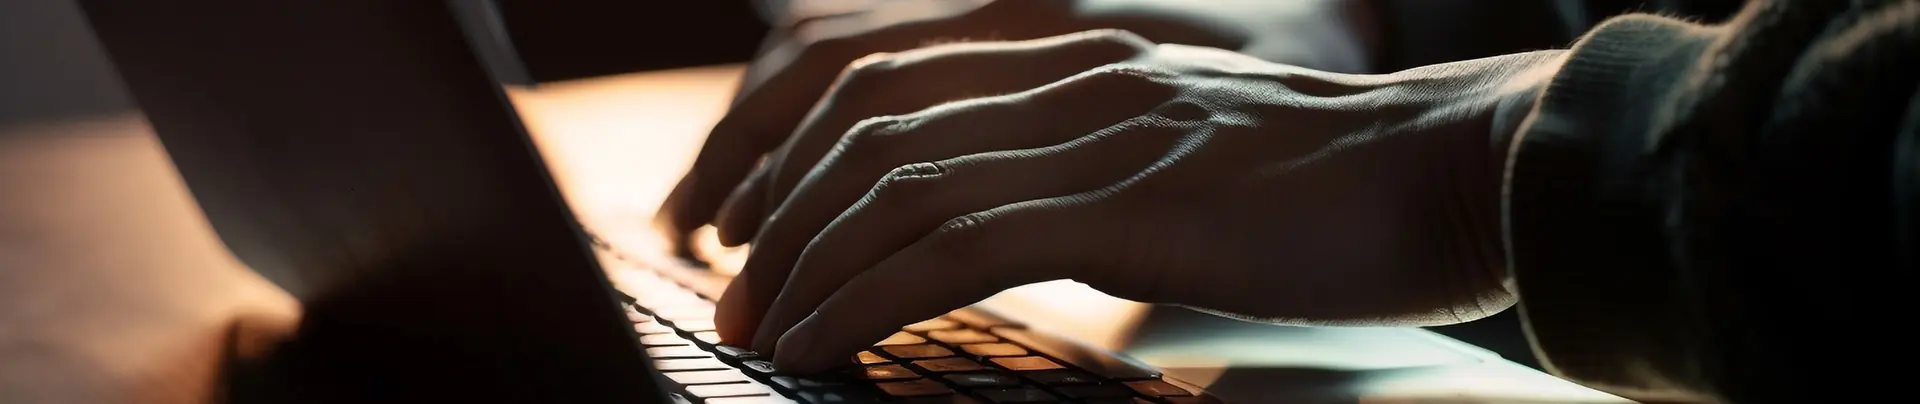 hands tiping on a computer keyboard